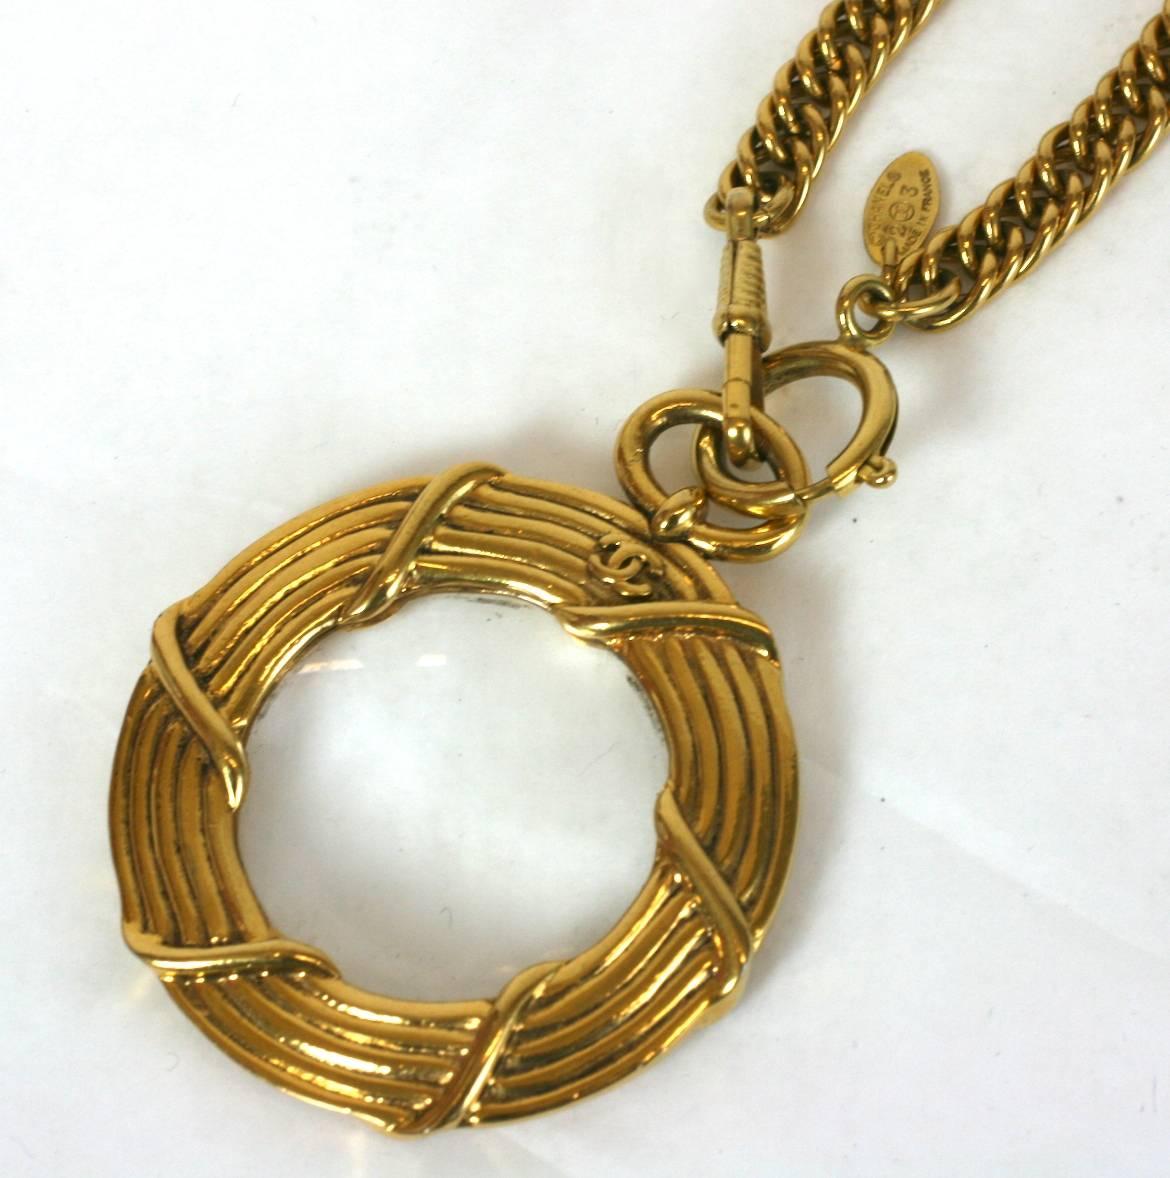 Chanel Logo Magnifier Pendant In Good Condition For Sale In New York, NY